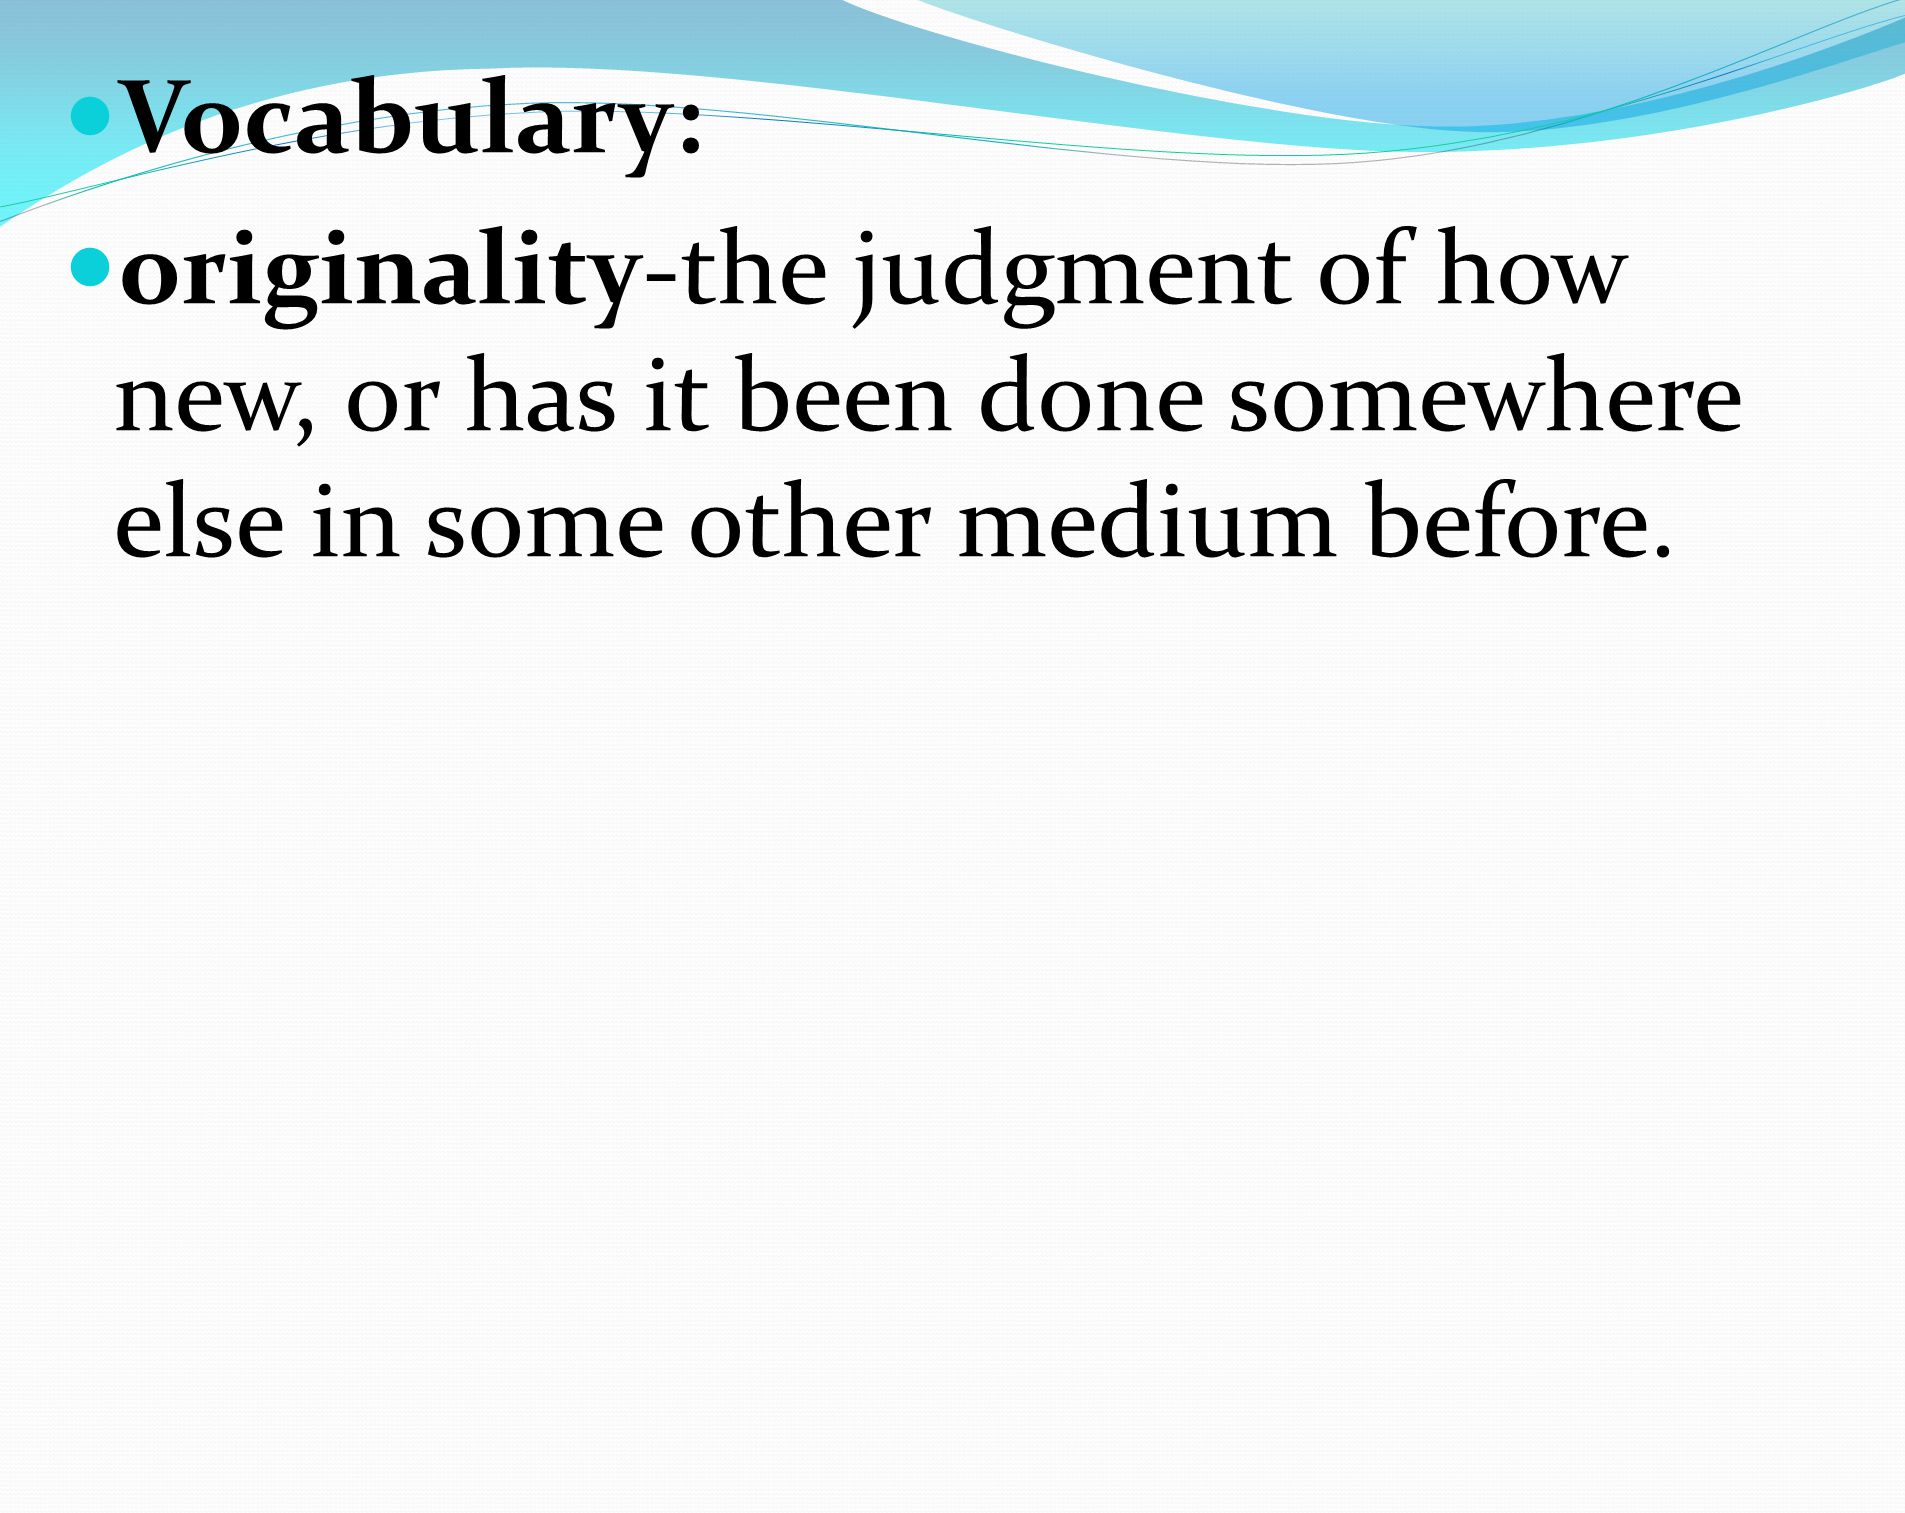 Vocabulary: originality-the judgment of how new, or has it been done somewhere else in some other medium before.